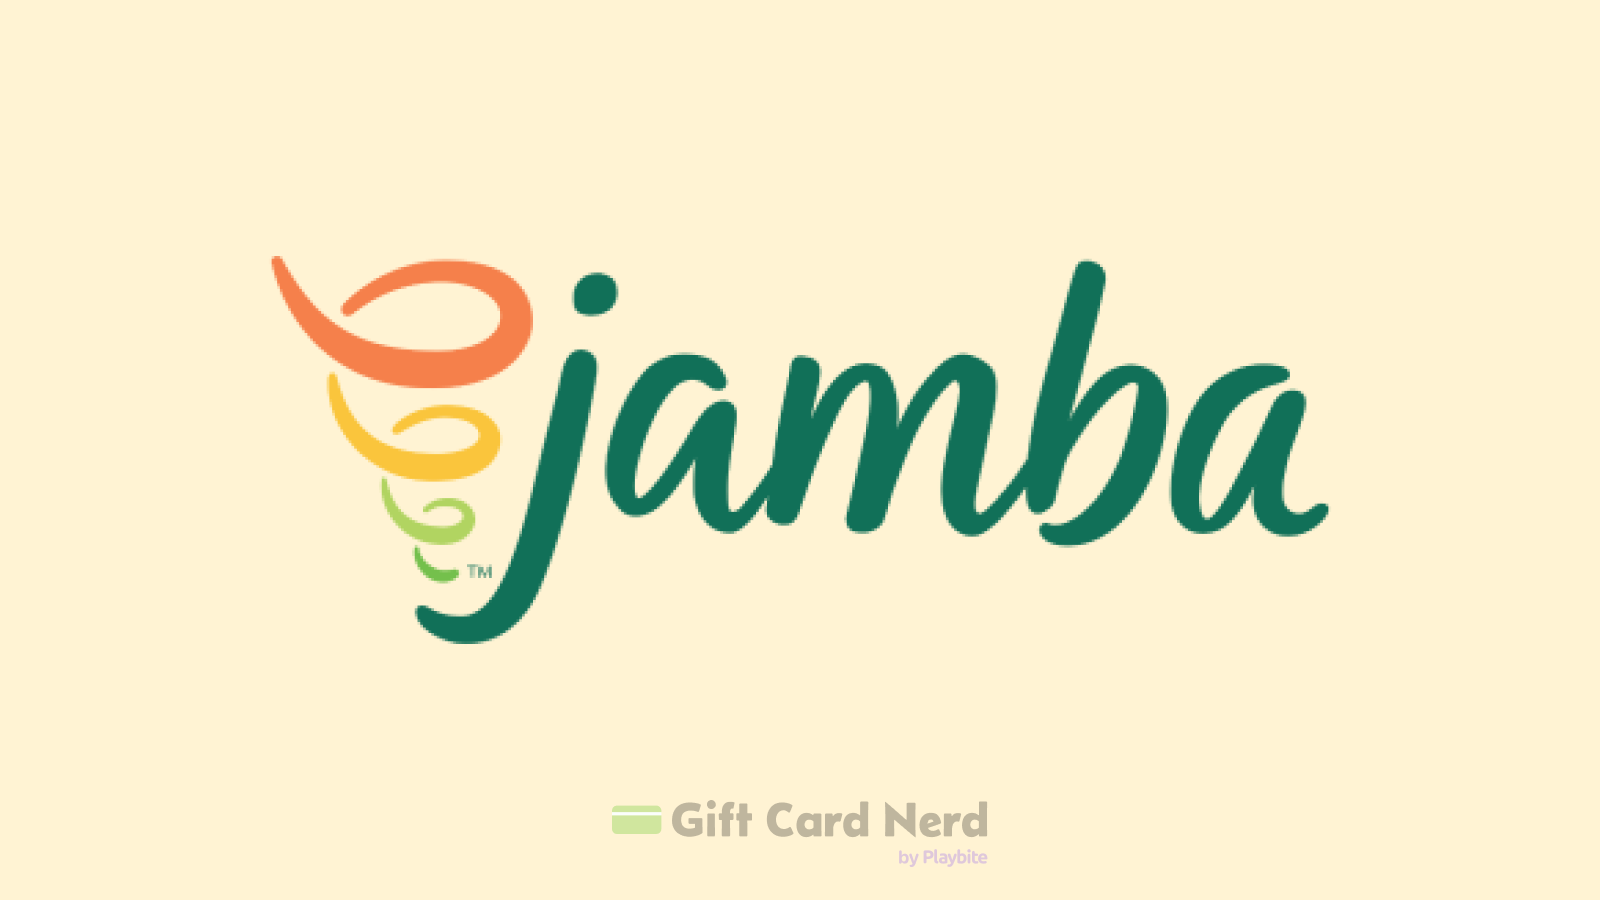 Does CVS Sell Jamba Juice Gift Cards?